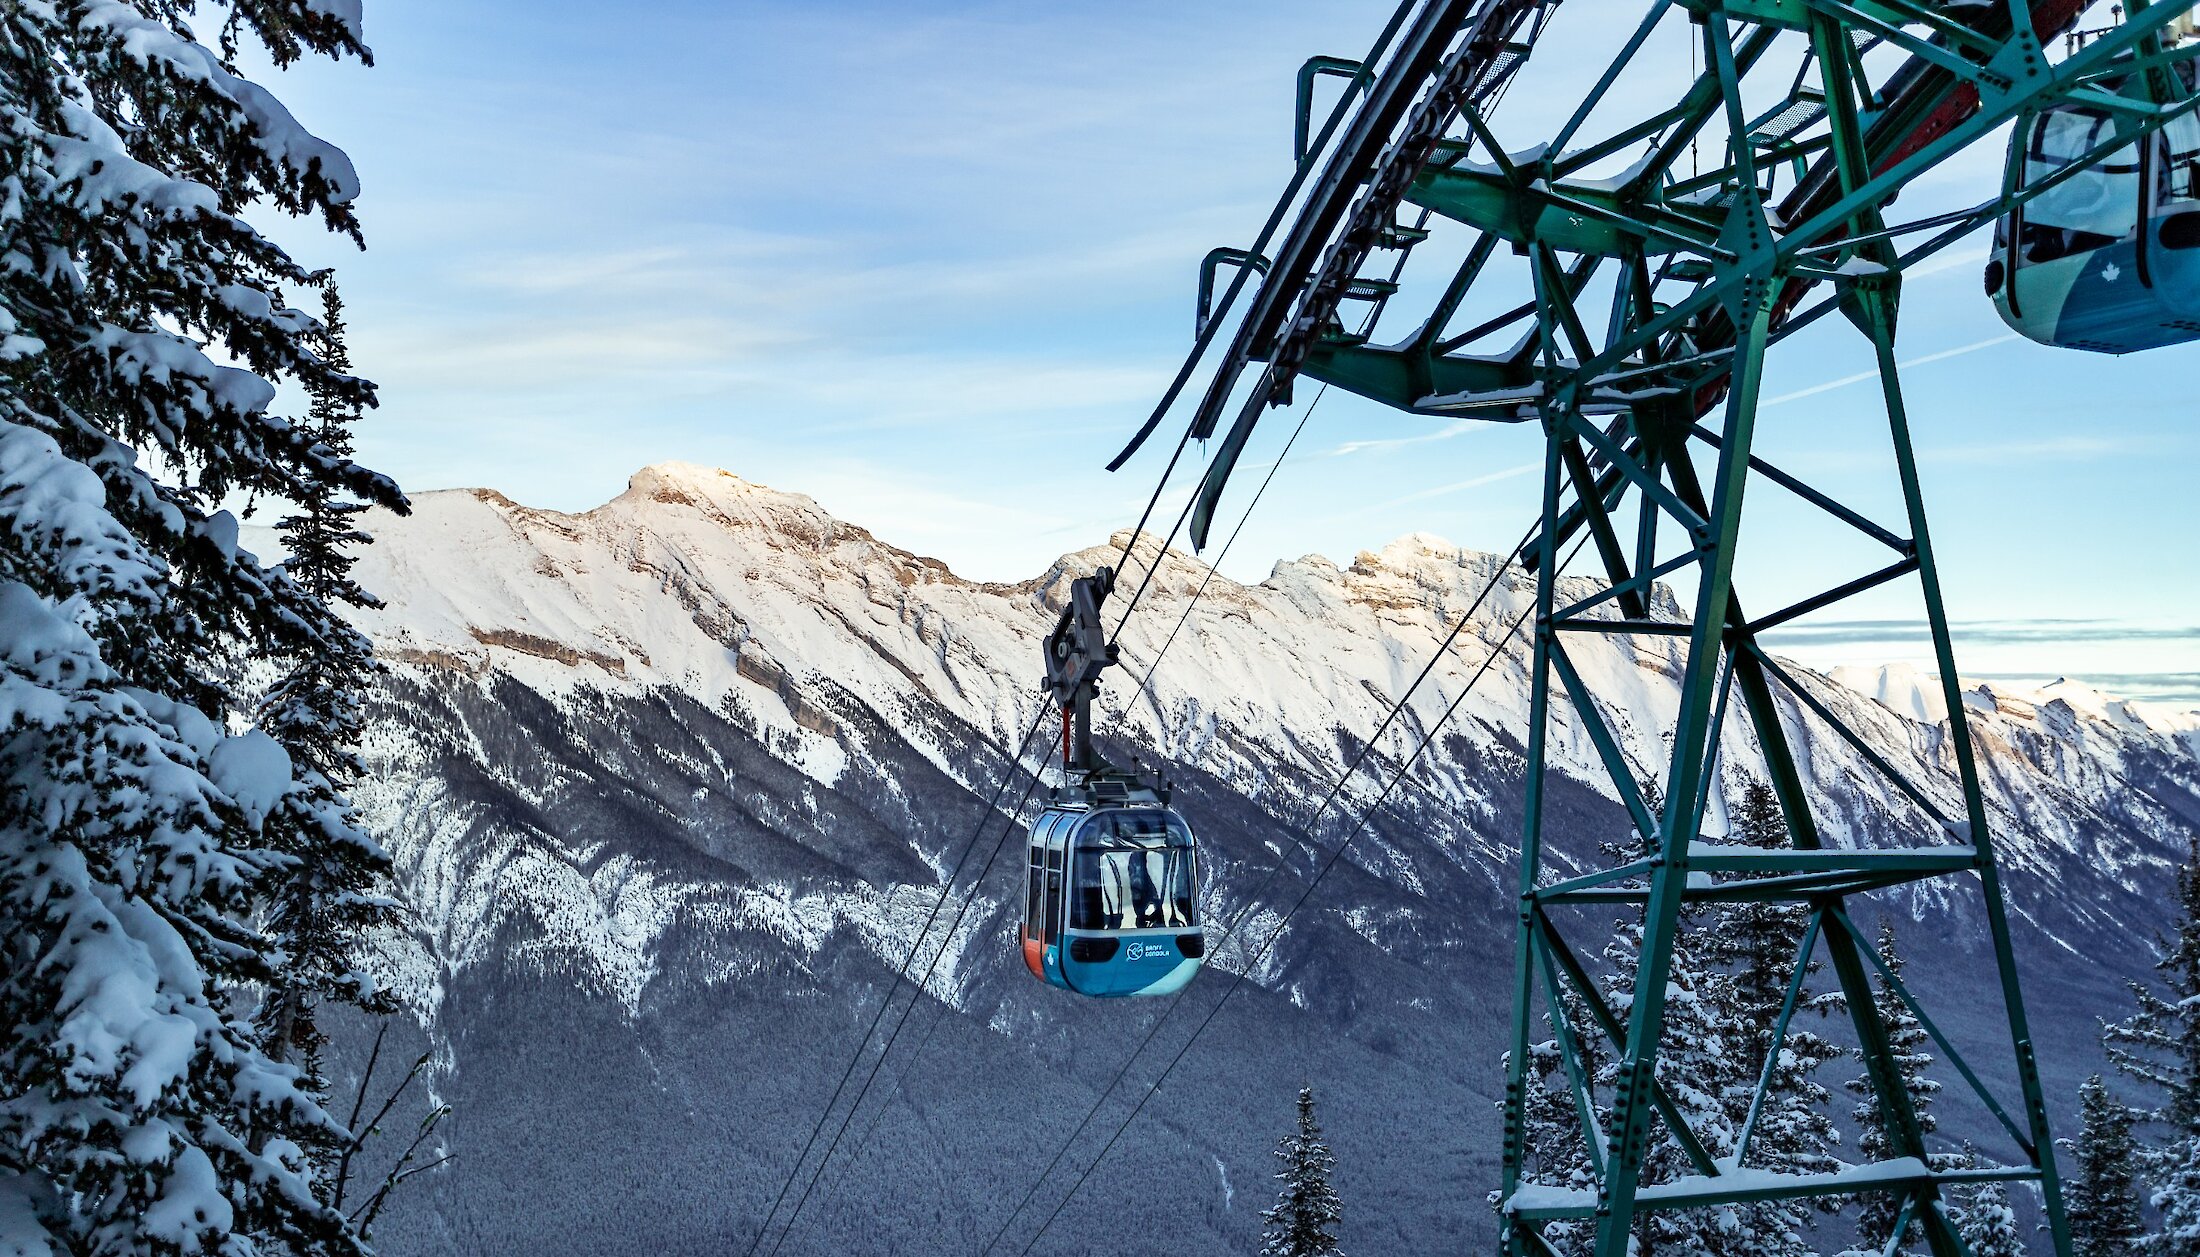 A Banff Gondola car with view of Mount Rundle in Banff